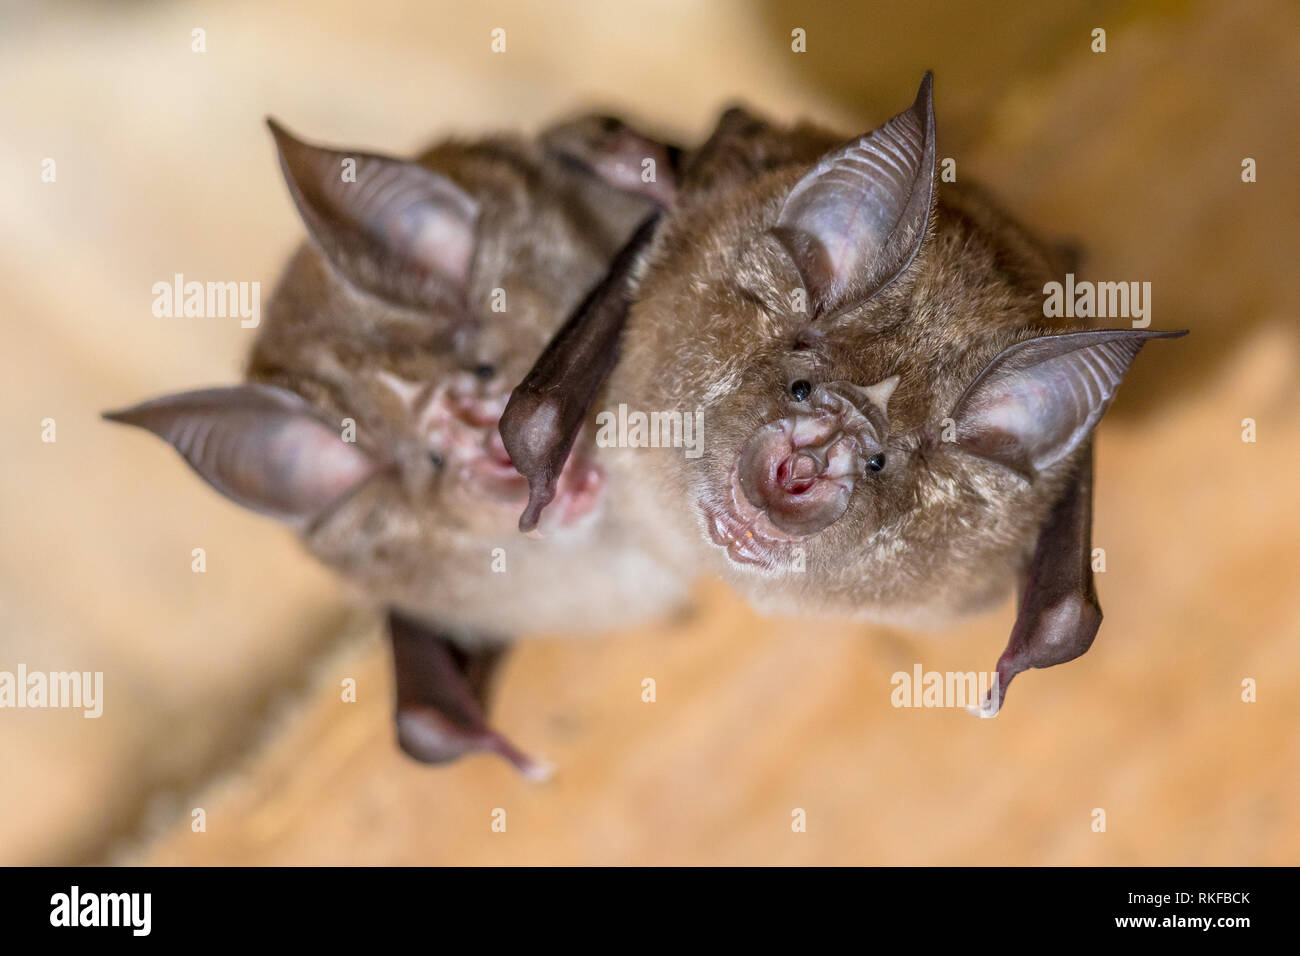 Two greater horseshoe bat (Rhinolophus ferrumequinum) this species occurs in Europe, Northern Africa, Central Asia and Eastern Asia. It is the largest Stock Photo